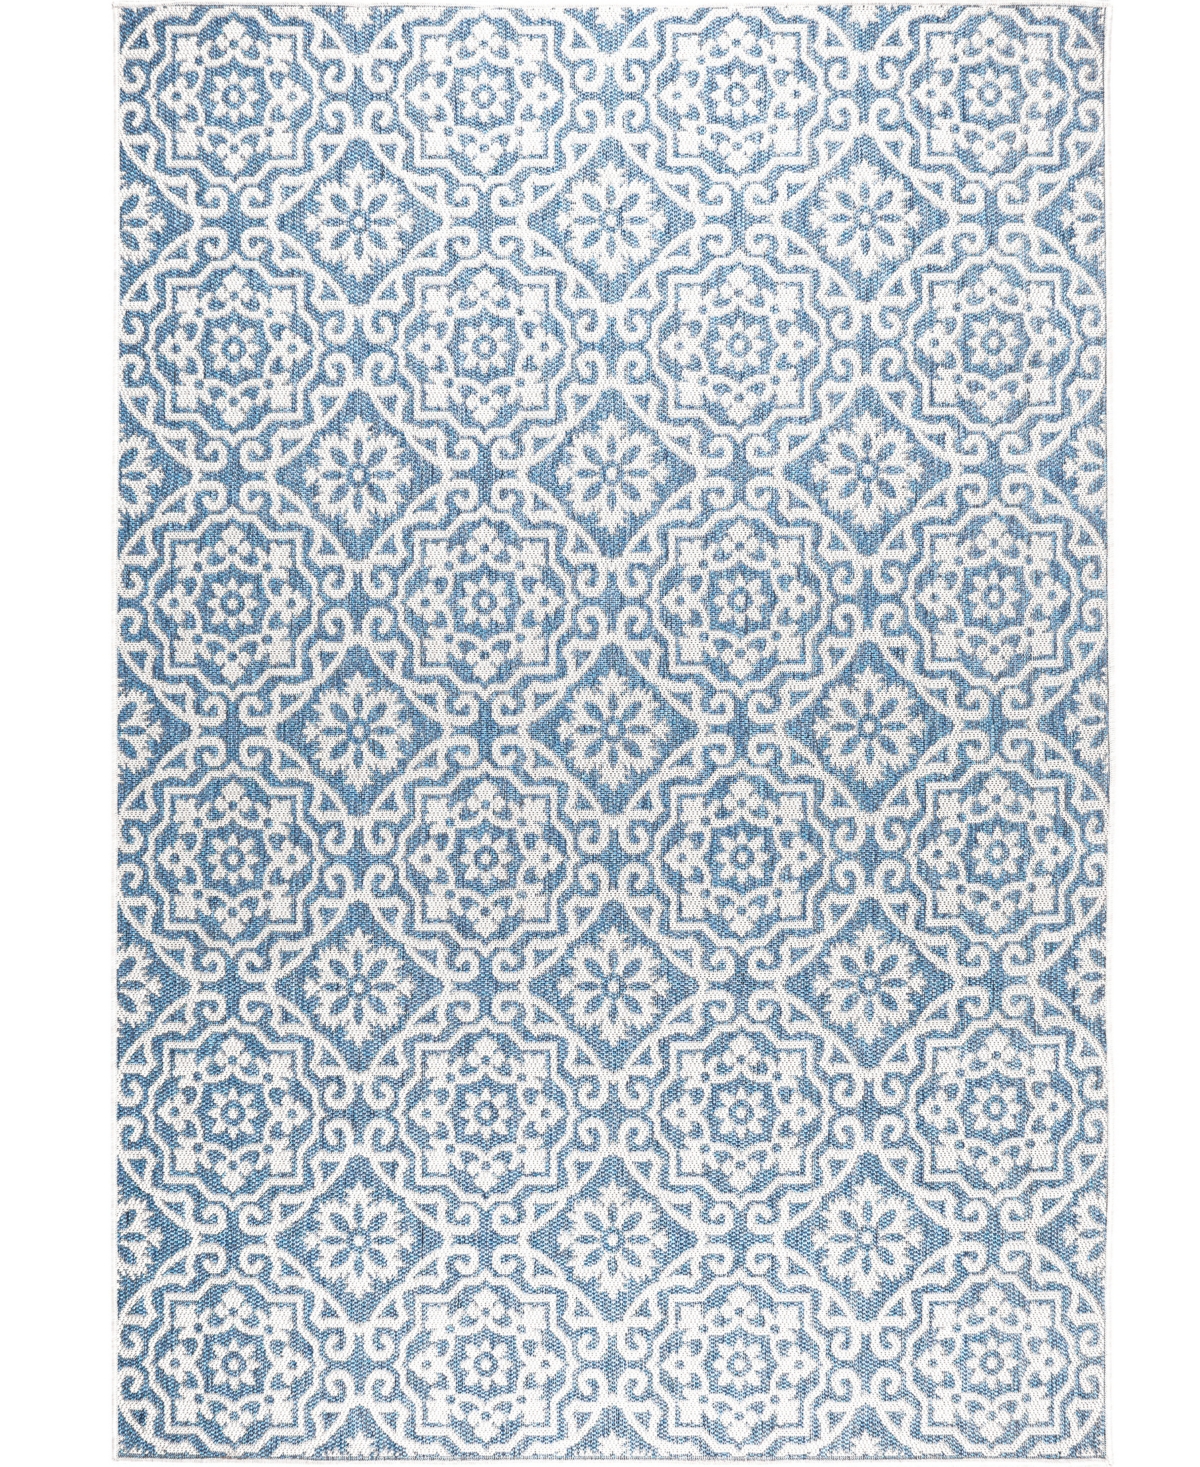 Nicole Miller Patio Country Danica 1'9" X 2'11" Area Rug In Blue,gray